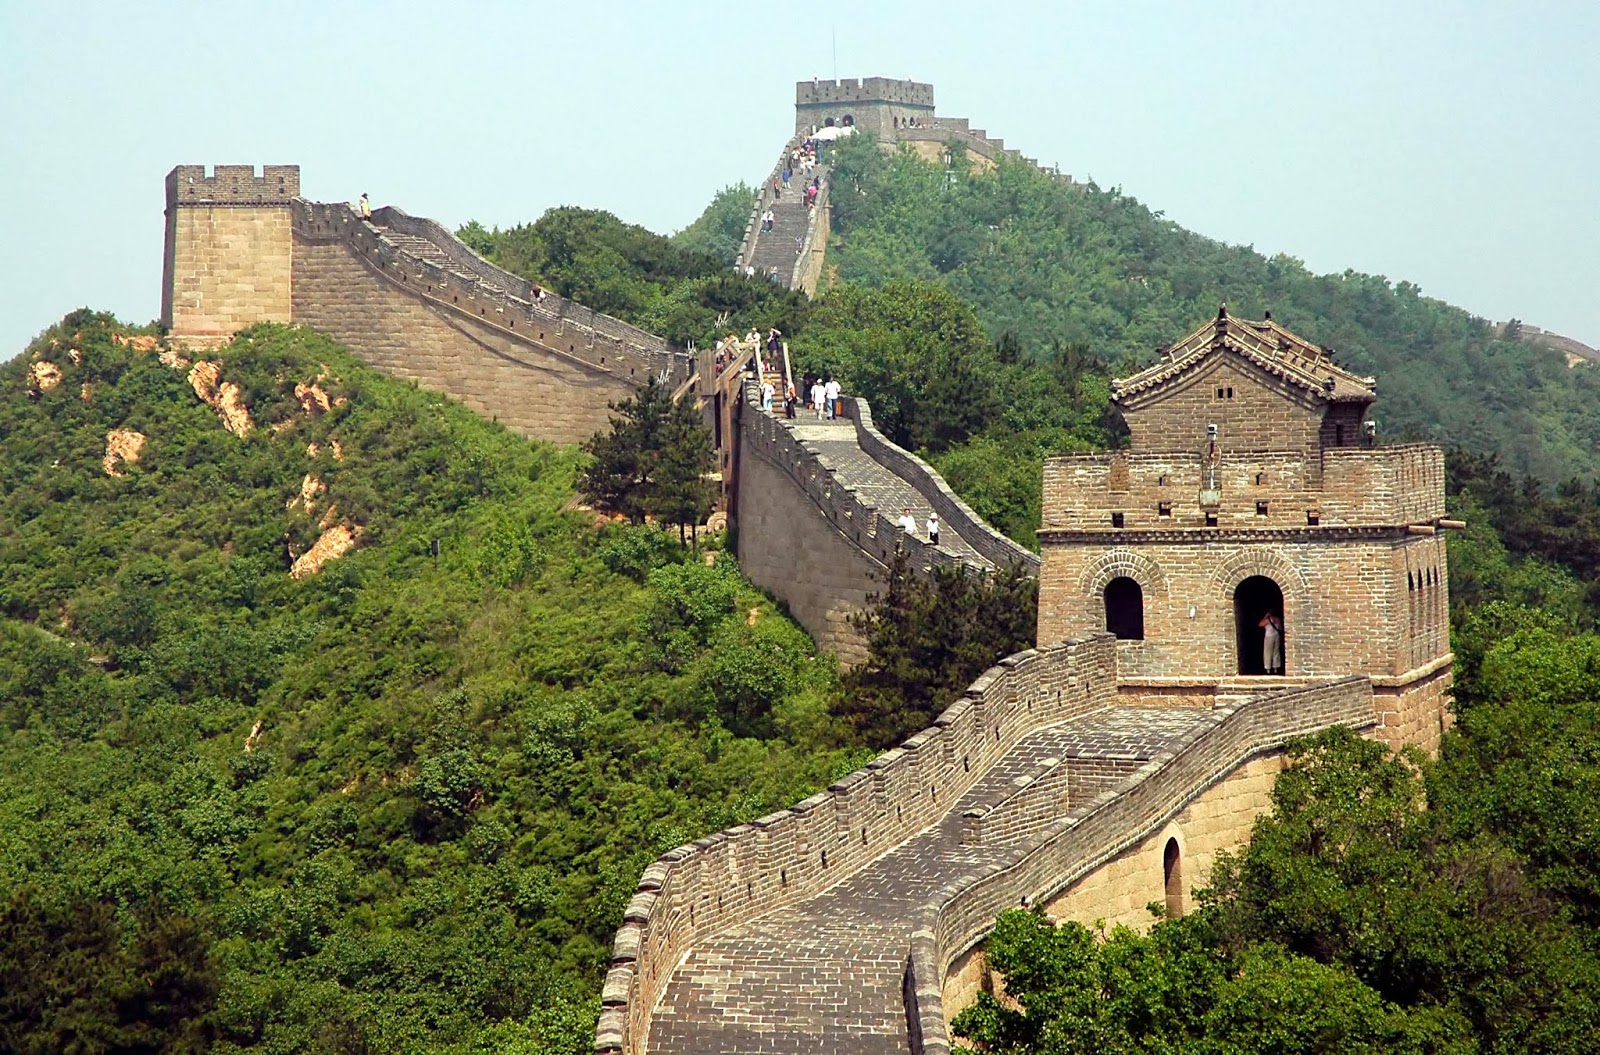 World Visits: The Great Wall of China - Seven Wonder In The World